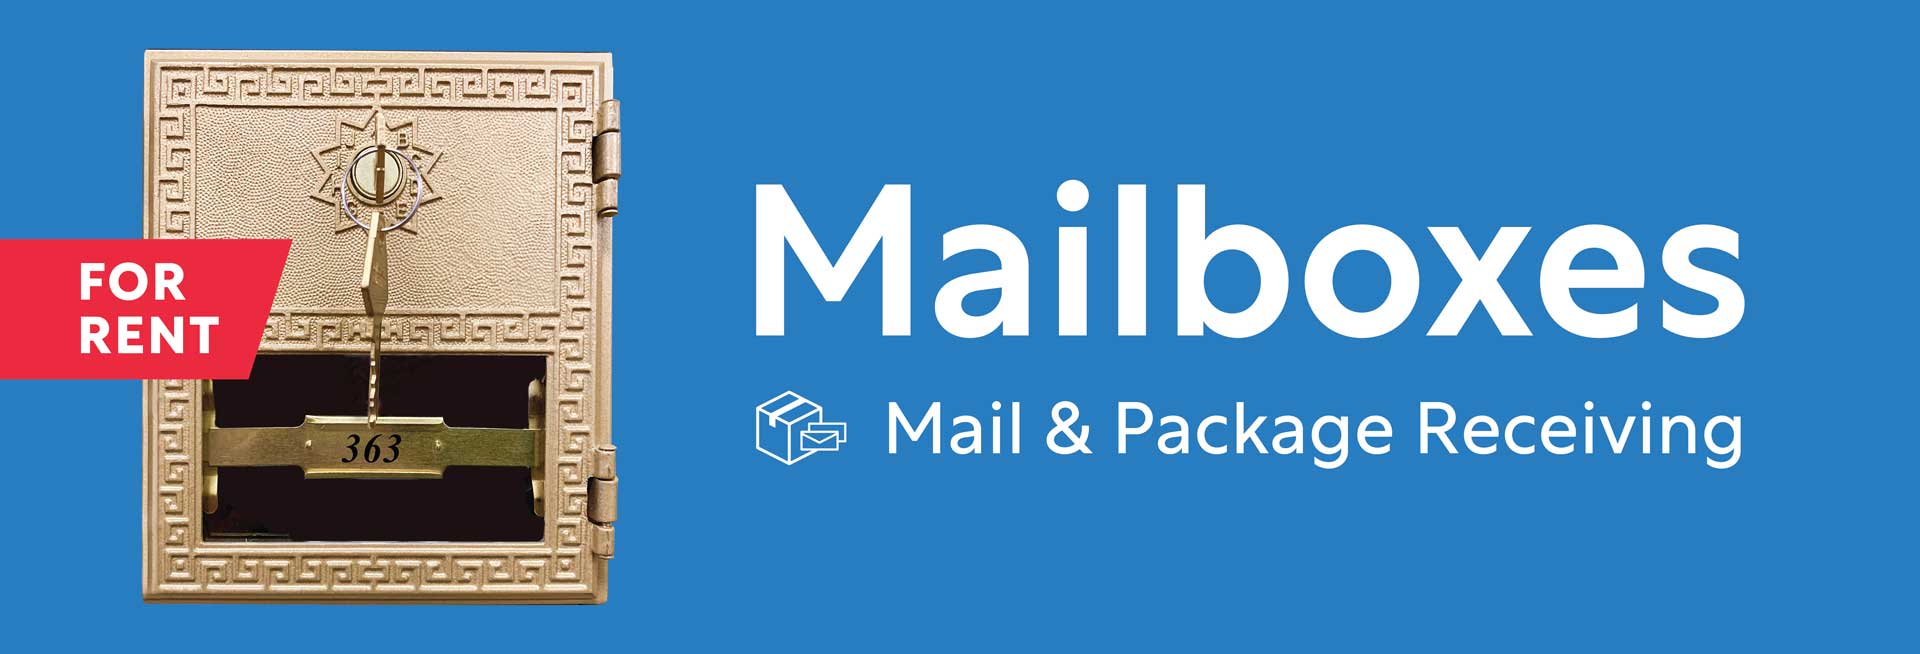 Mailboxes - Mail and Package Receiving